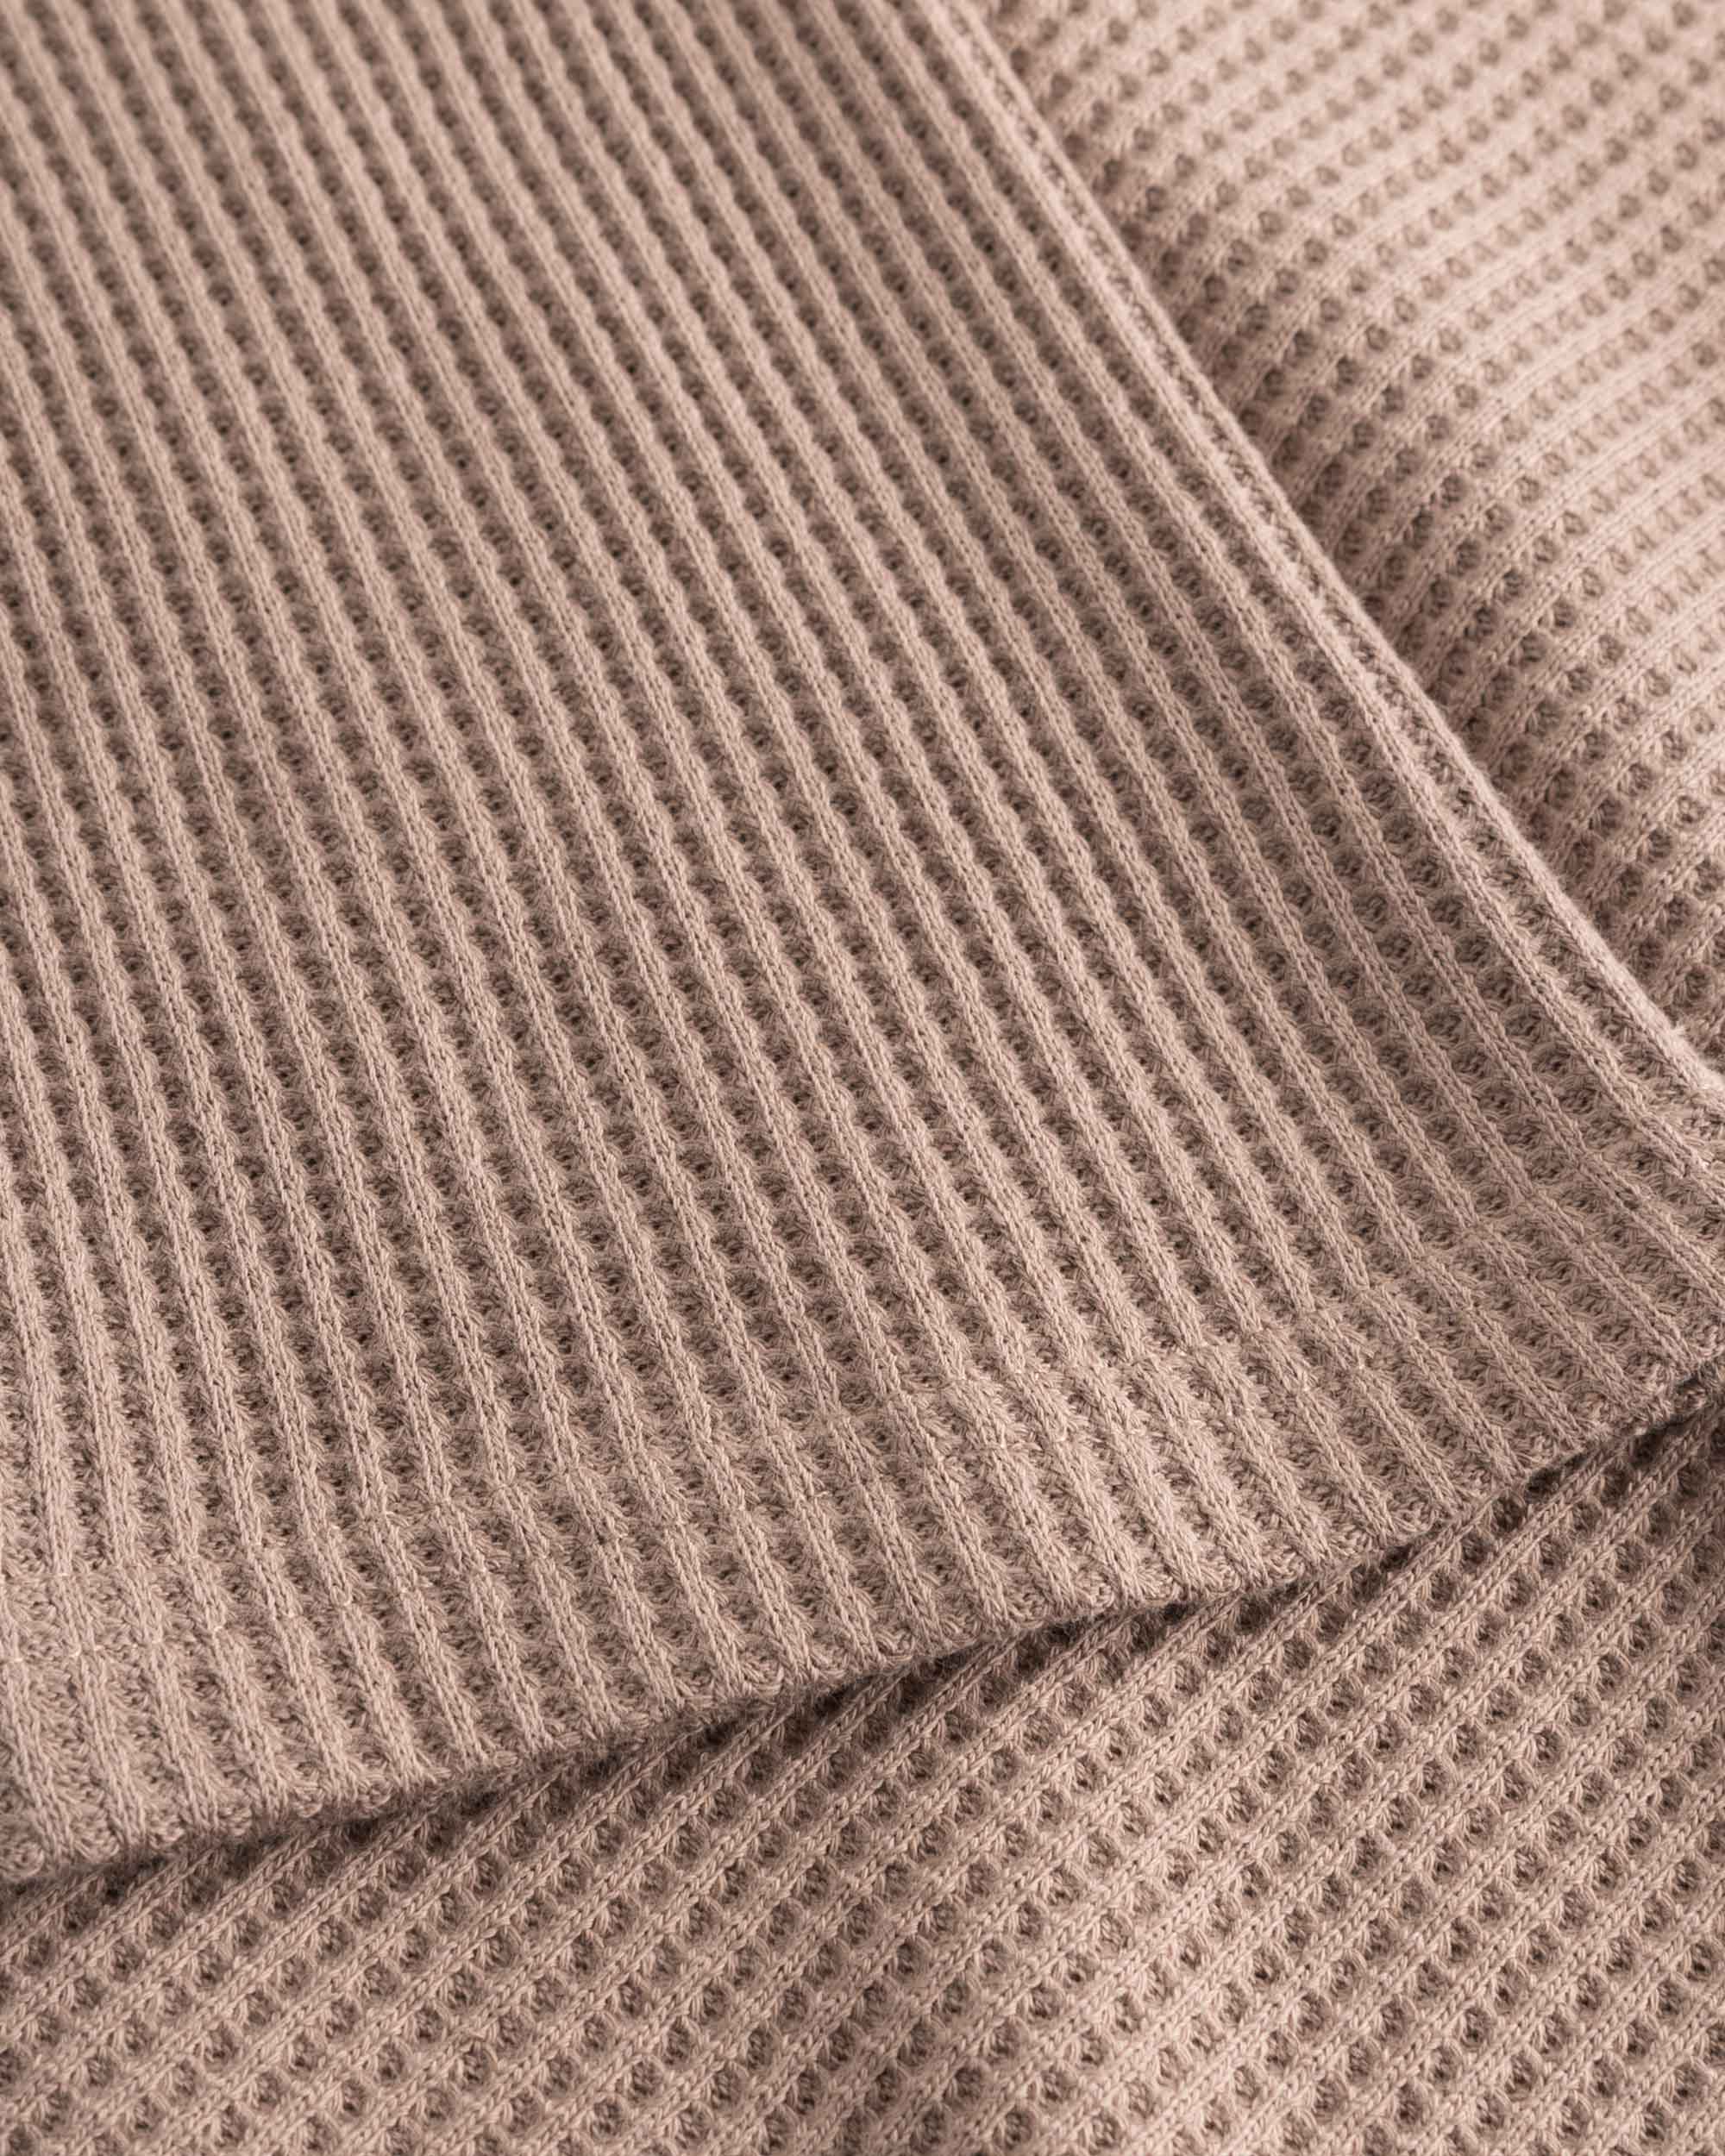 Close up on stitchings and sleeve on a brown waffle-patterned cropped sweatshirt